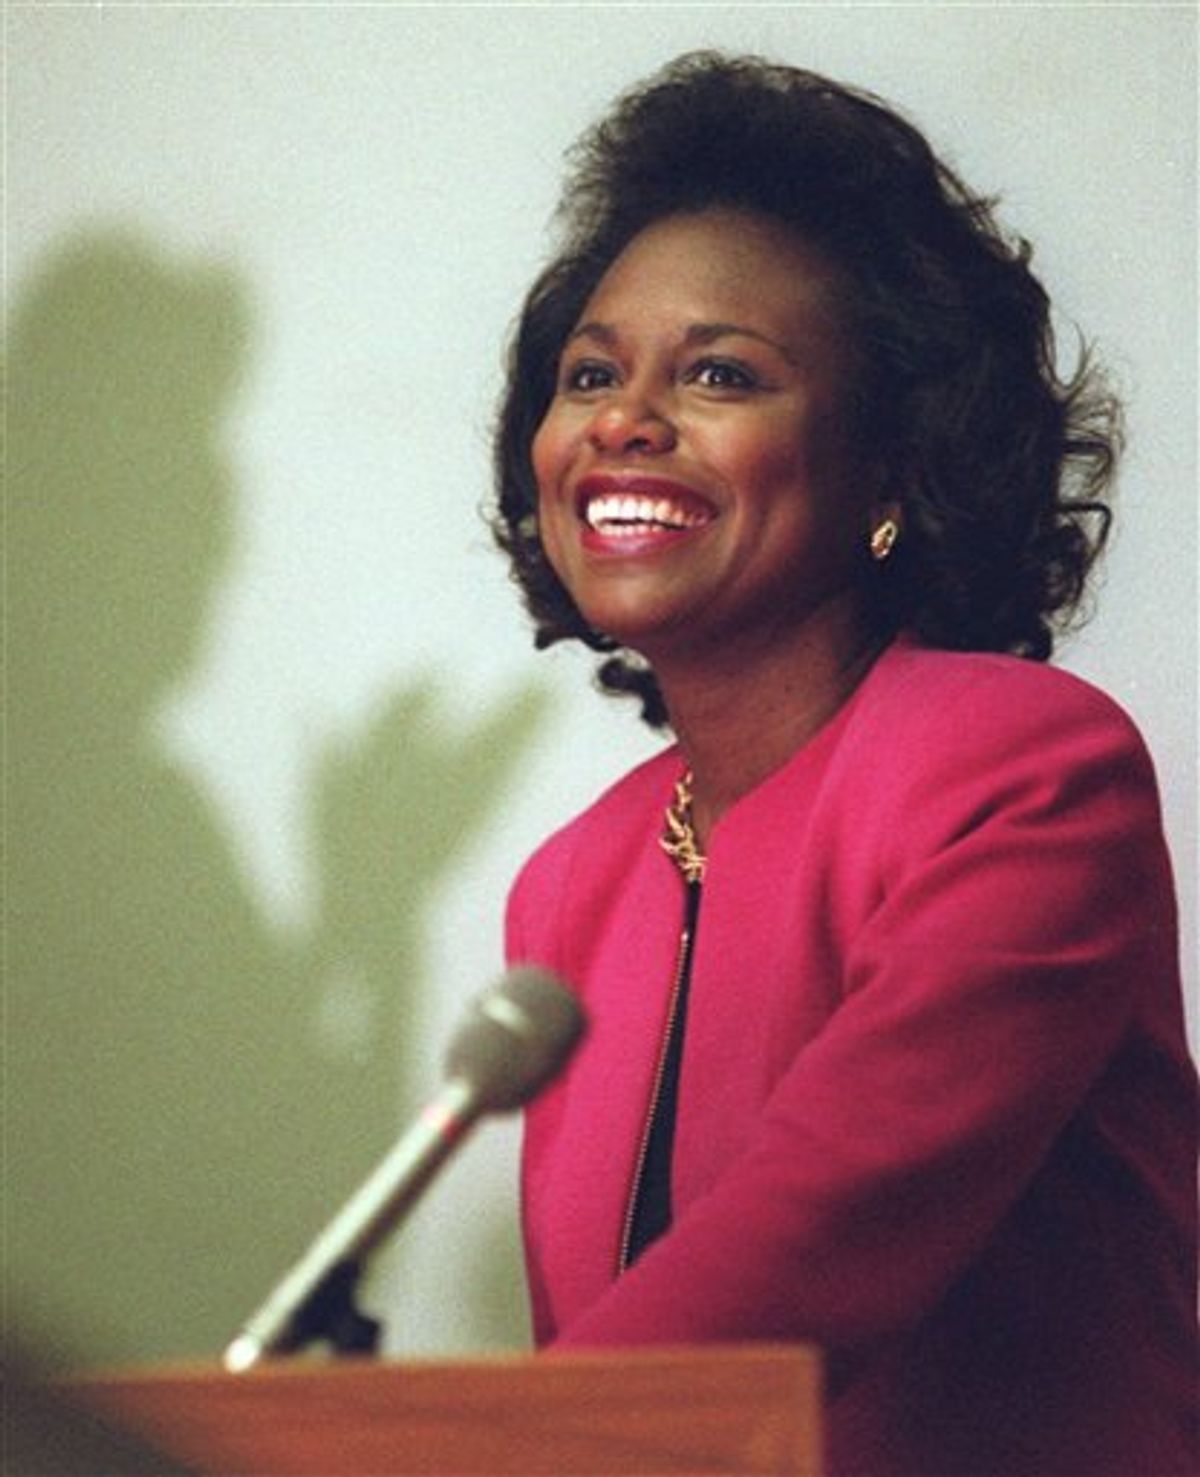 FILE - In this April 8, 1993, file photo, Anita Hill is seen in Cambridge, Mass. Virginia Thomas, wife of Supreme Court Justice Clarence Thomas is asking Hill to apologize for accusing the justice of sexually harassing her, 19 years after Thomas' confirmation hearing spawned a national debate about harassment in the workplace.  (AP Photo/Susan Walsh) (AP)